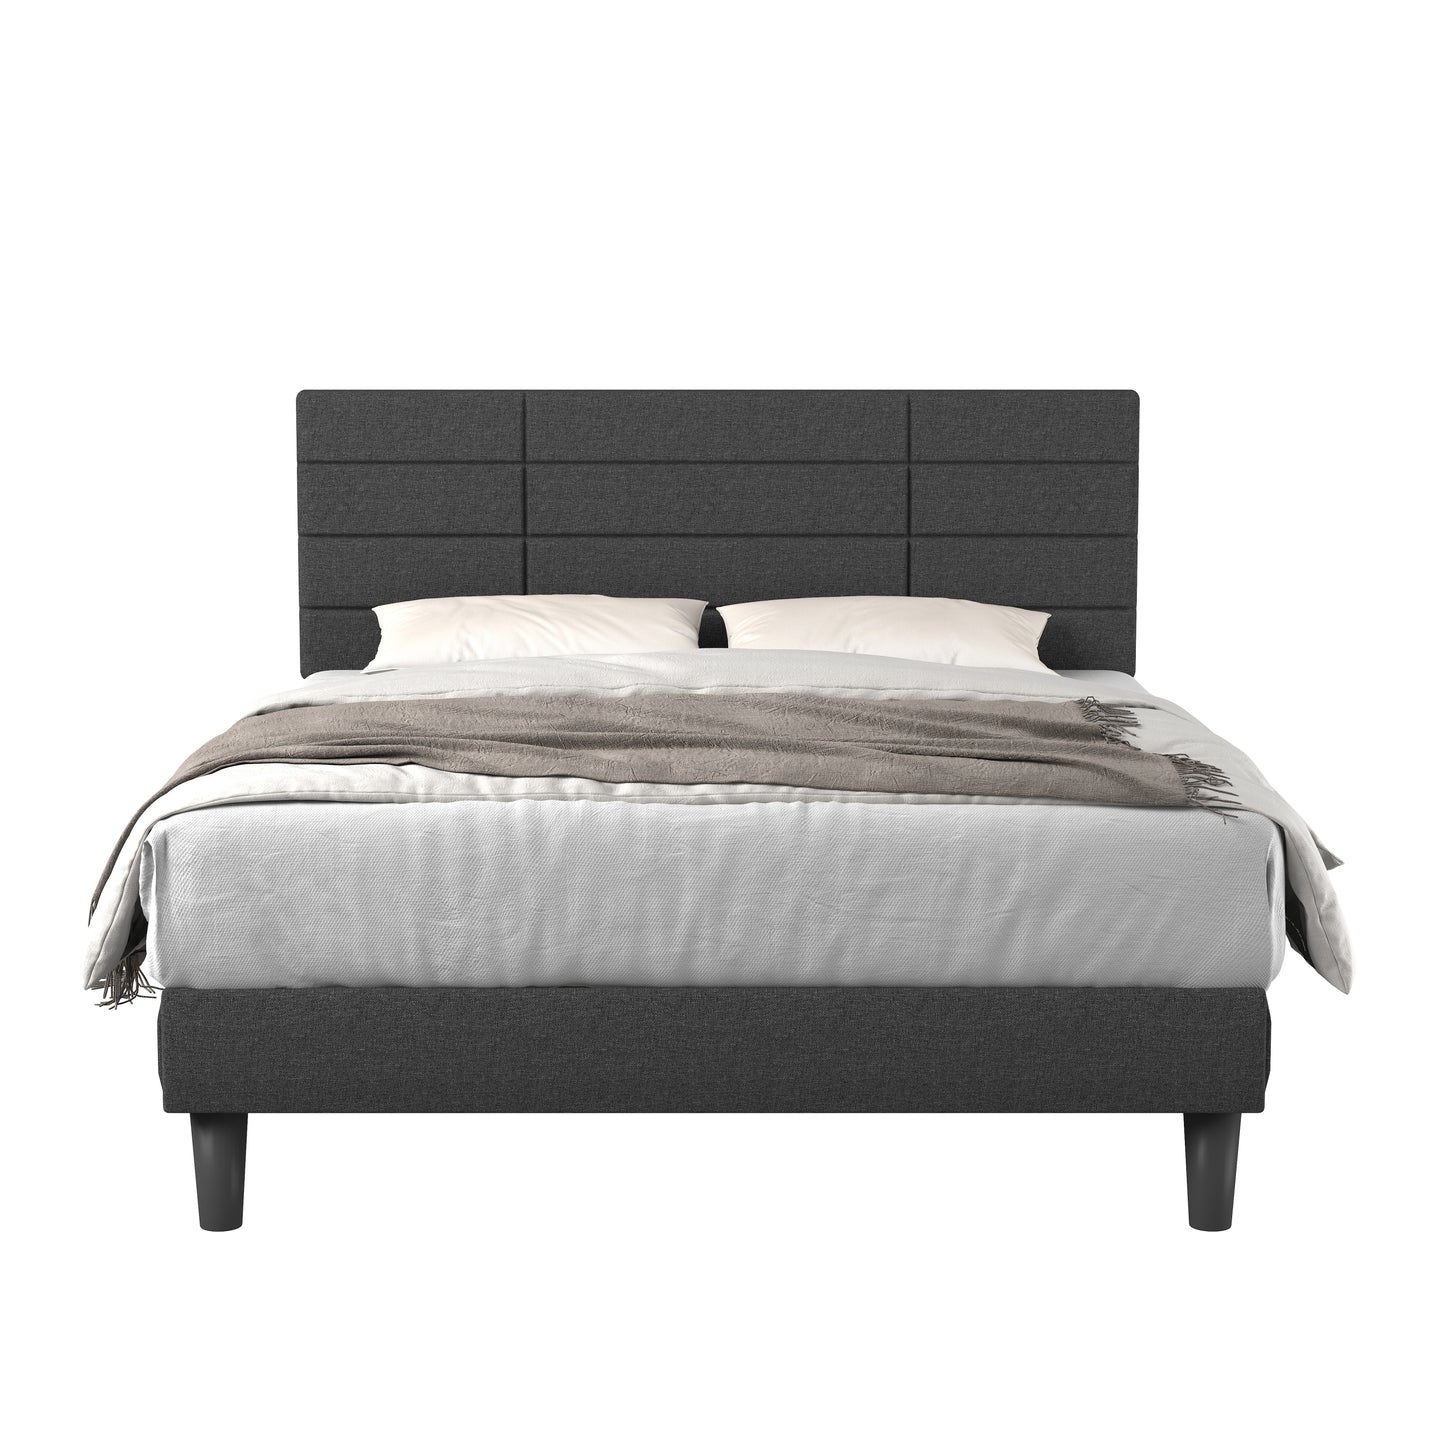 Molblly Queen Size Platform Bed Frame with Upholstered Headboard, Strong Frame, and Wooden Slats Support, Non-Slip and Noise-Free, No Box Spring Needed, Easy Assembly, Dark Grey